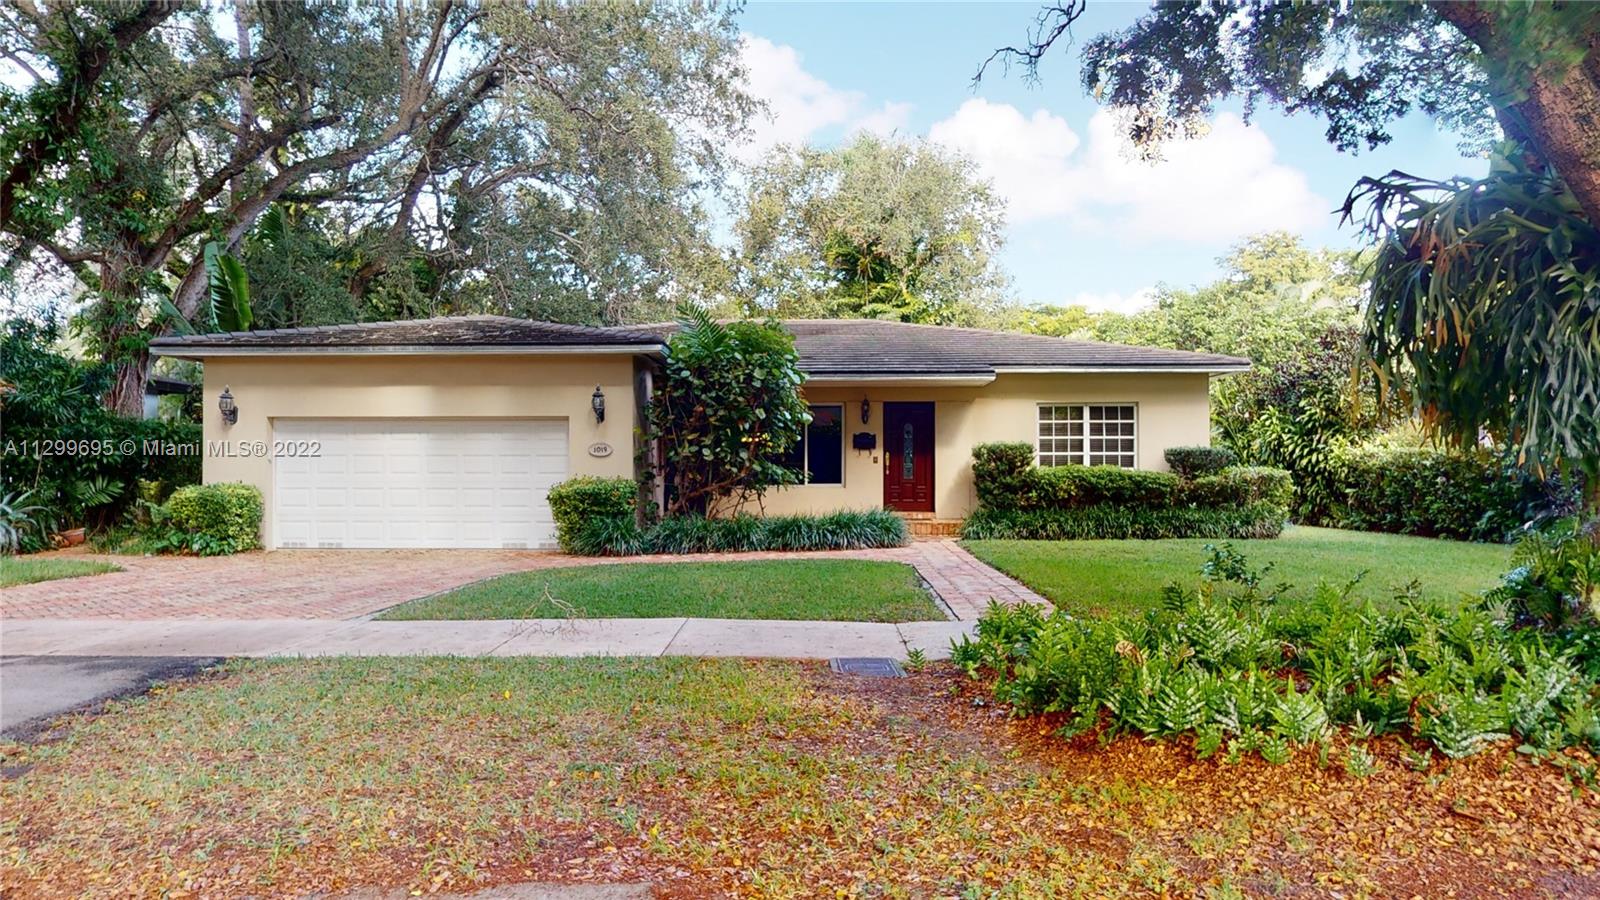 Don't miss out on this one-of-a-kind opportunity to live in this well-maintained home, ideally located on a tree-lined S. Gables street. Located in a quiet area of Coral Gables. Spacious home with a large open floor plan and beautiful flooring in the living areas. Open modern kitchen with matching countertops and backsplash. Great outdoor space, which is ideal for entertaining. The house is close to shops, restaurants, parks, and excellent schools. One can walk to the UM, Coconut Grove, downtown Coral Gables, and the Crossroads of South Miami are moments away. It is a must-see to appreciate. Call for a showing today.